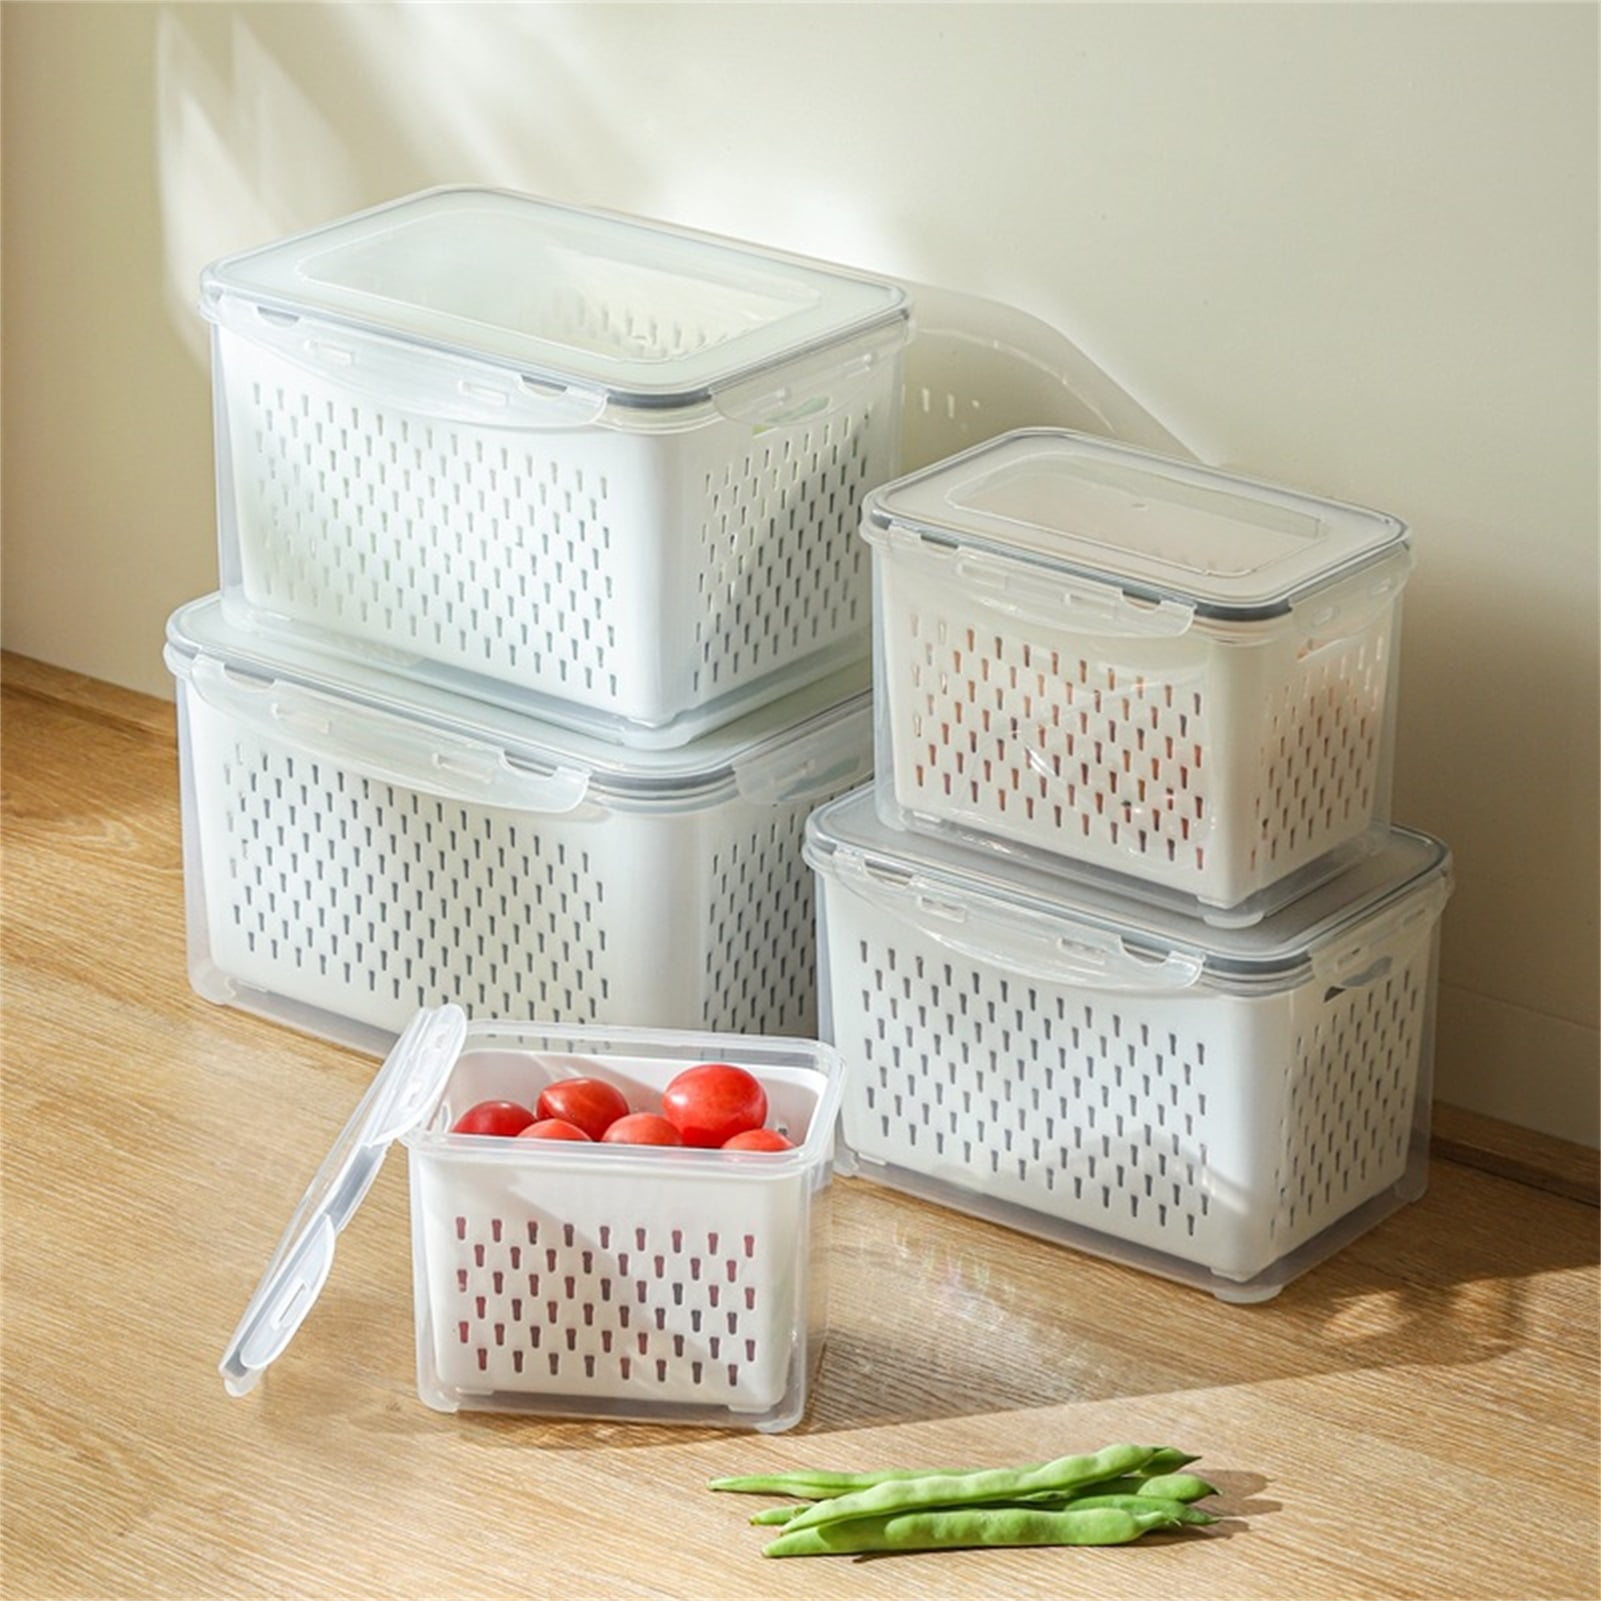 Sclvdi Food Storage Containers 2 Pack Refrigerator Kitchen Food Storage Organizer Boxes with Lids and 6 Removable Bins for Sugar, Flour, Snack, Baking